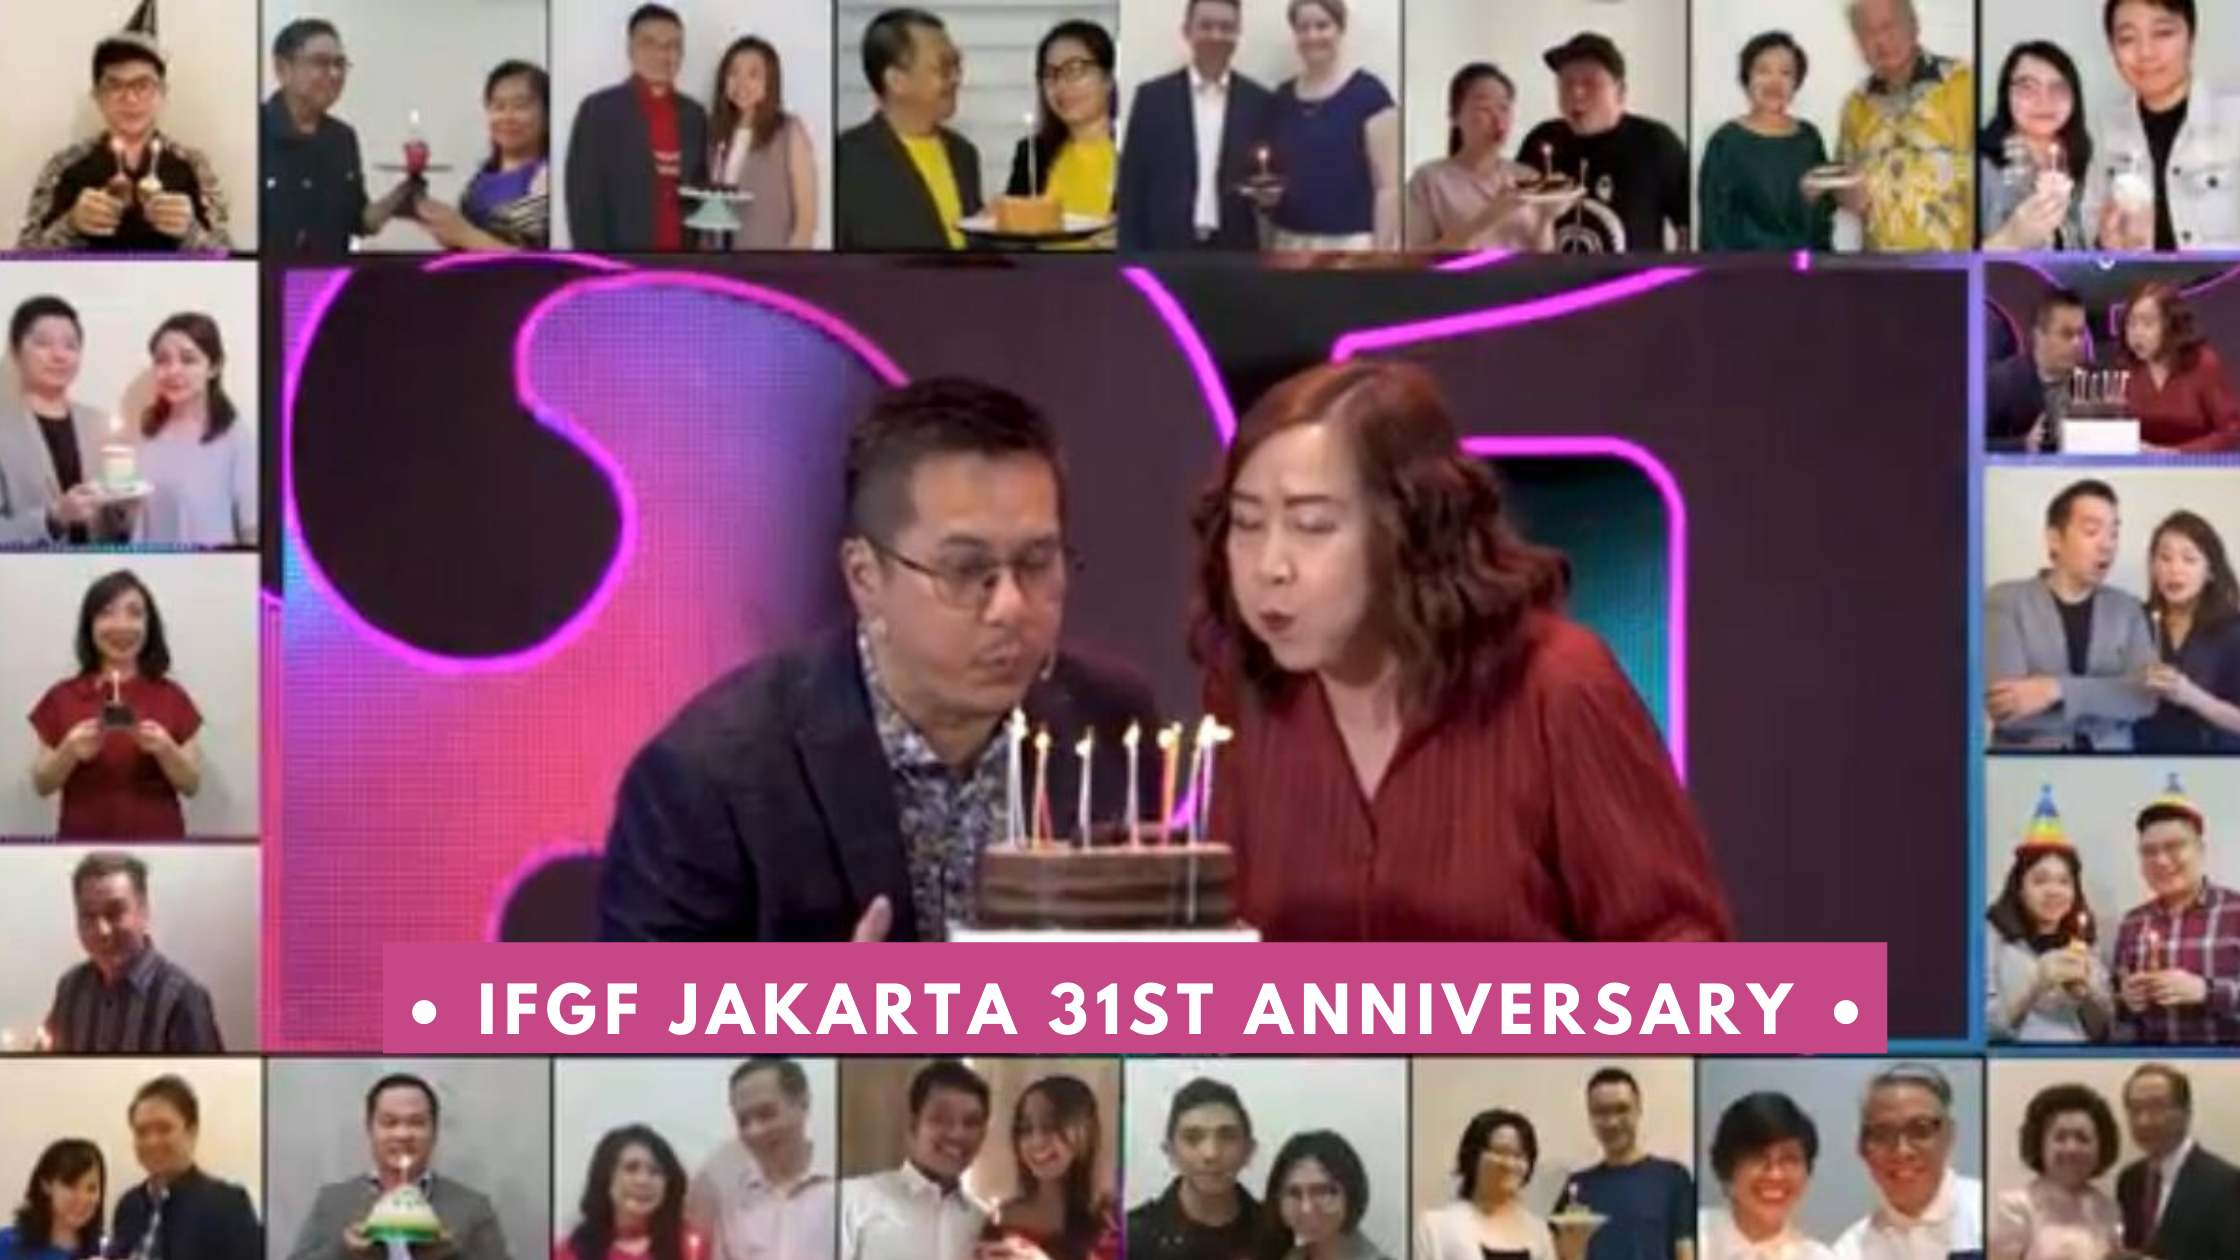 31st Anniversary for IFGF Jakarta